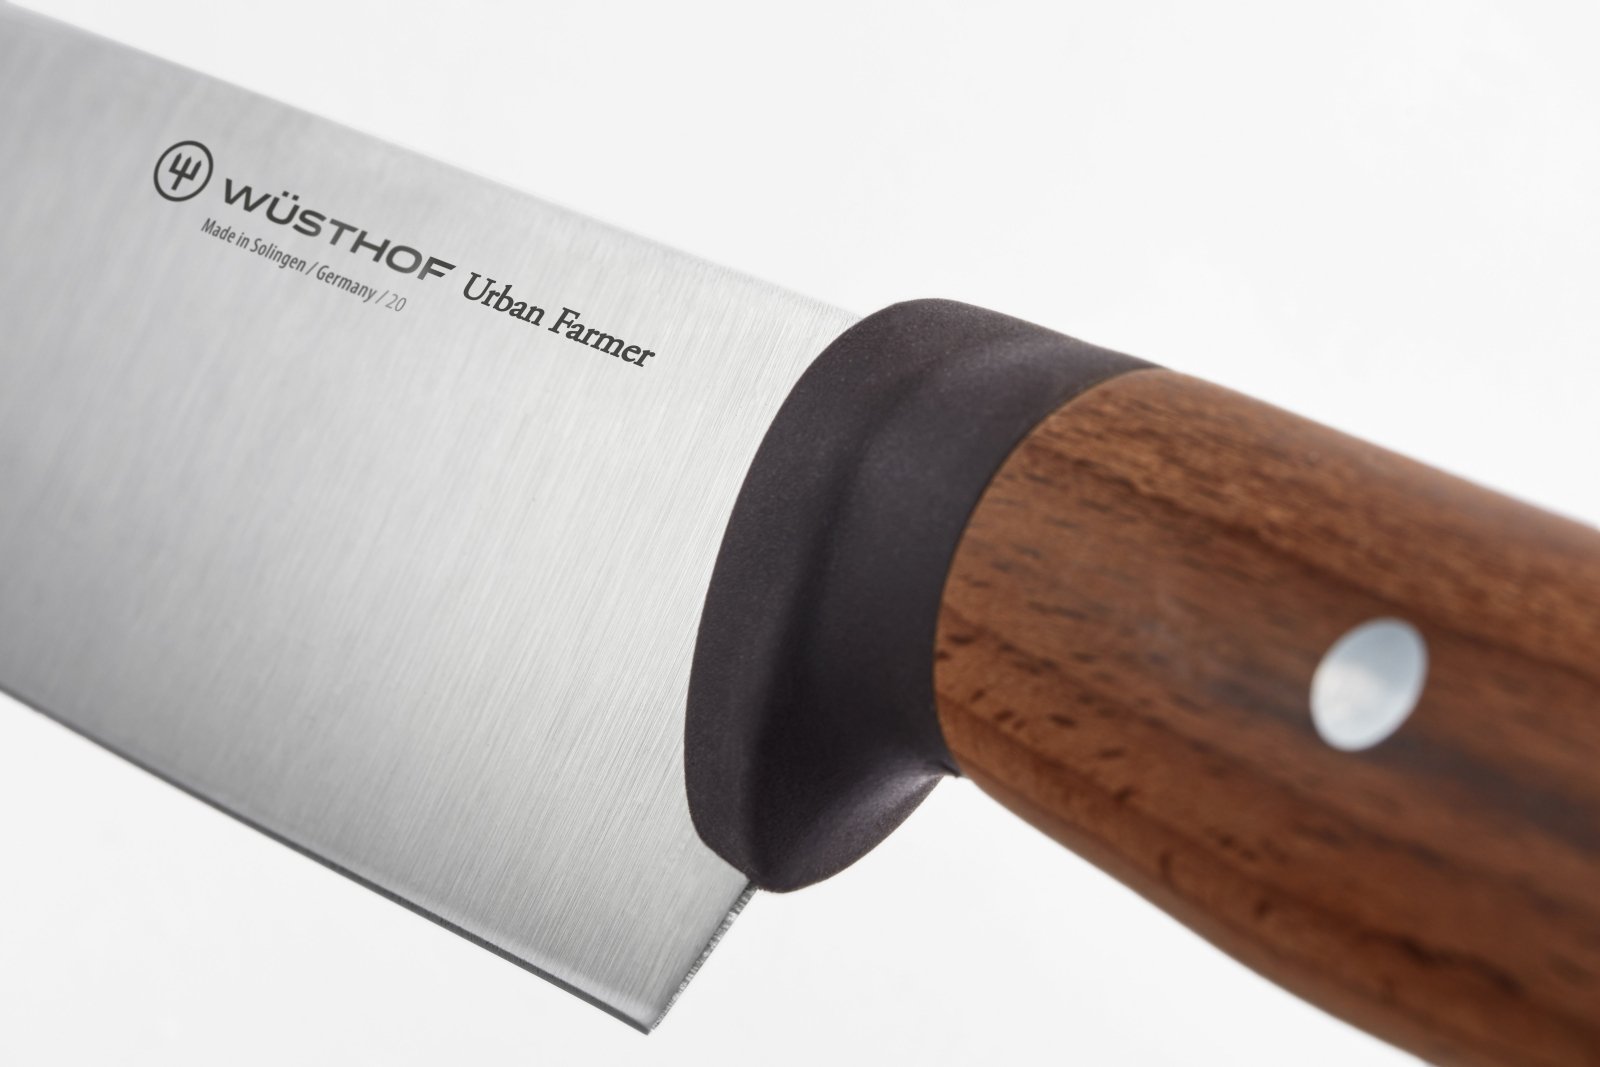 Wusthof Urban Farmer Cook‘s Knife 16cm - 1025244816 - The Cotswold Knife Company